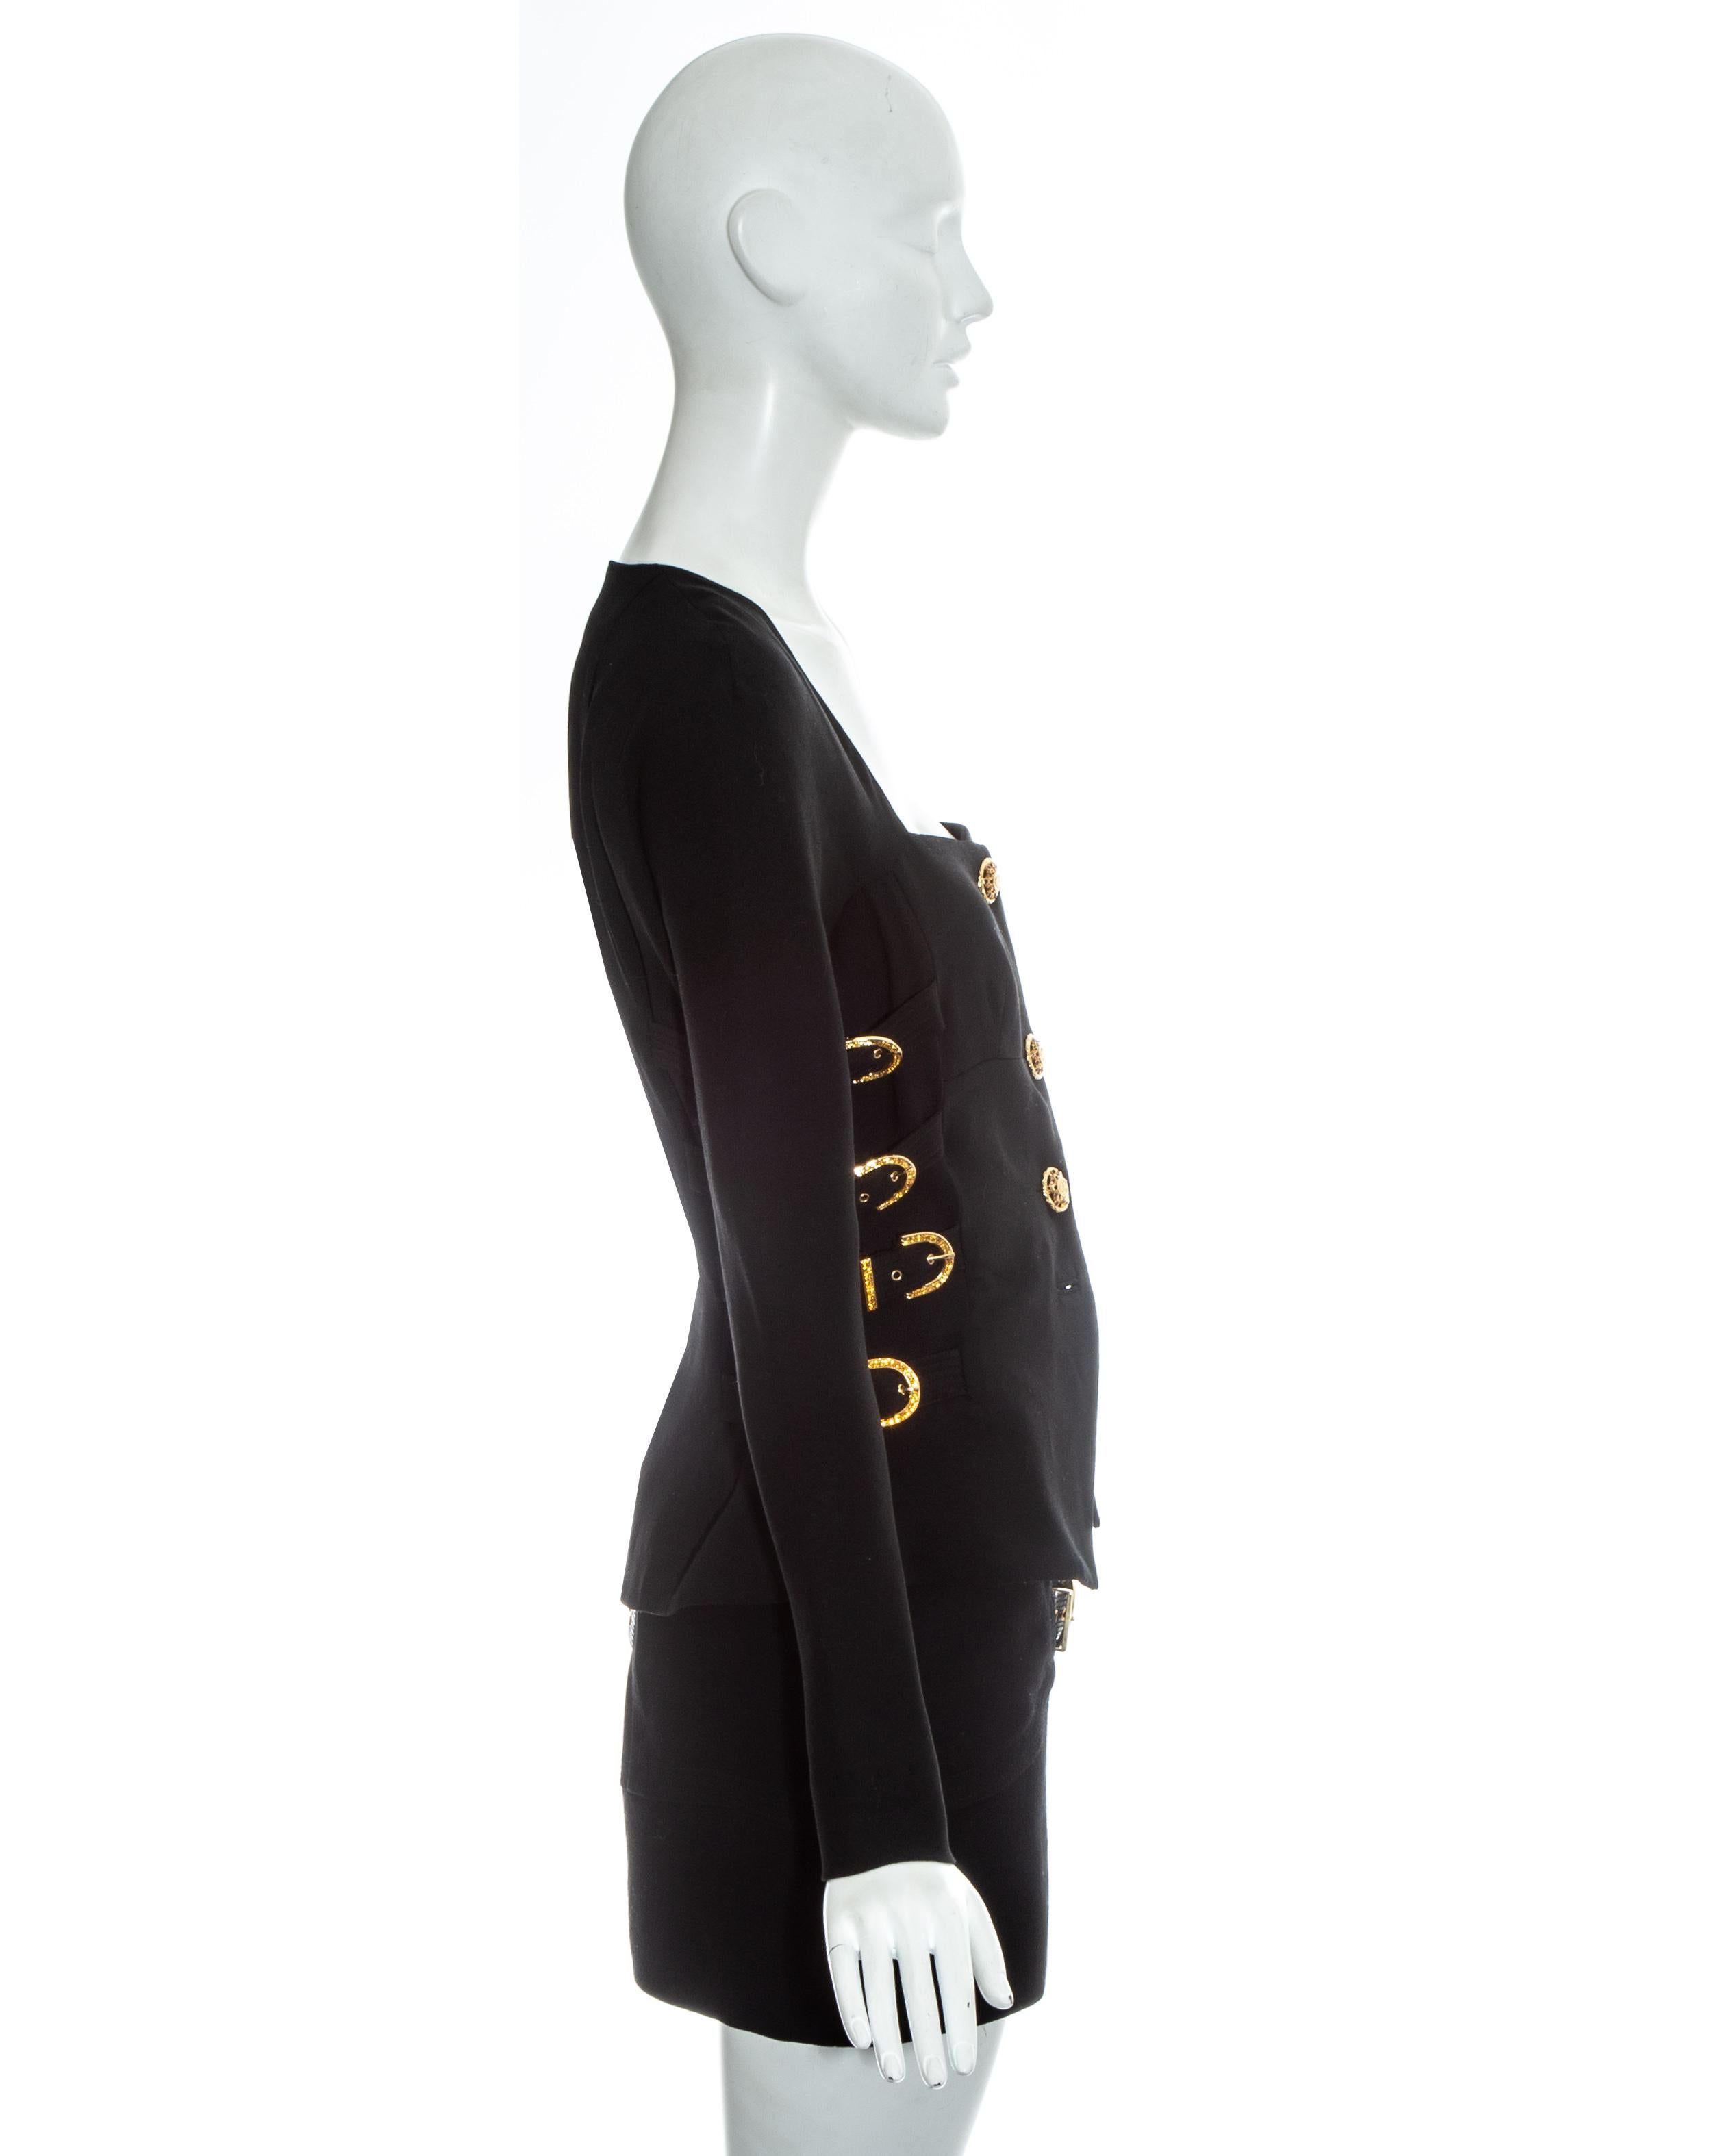 Gianni Versace black wool skirt suit with gold bondage buckles, fw 1992 2